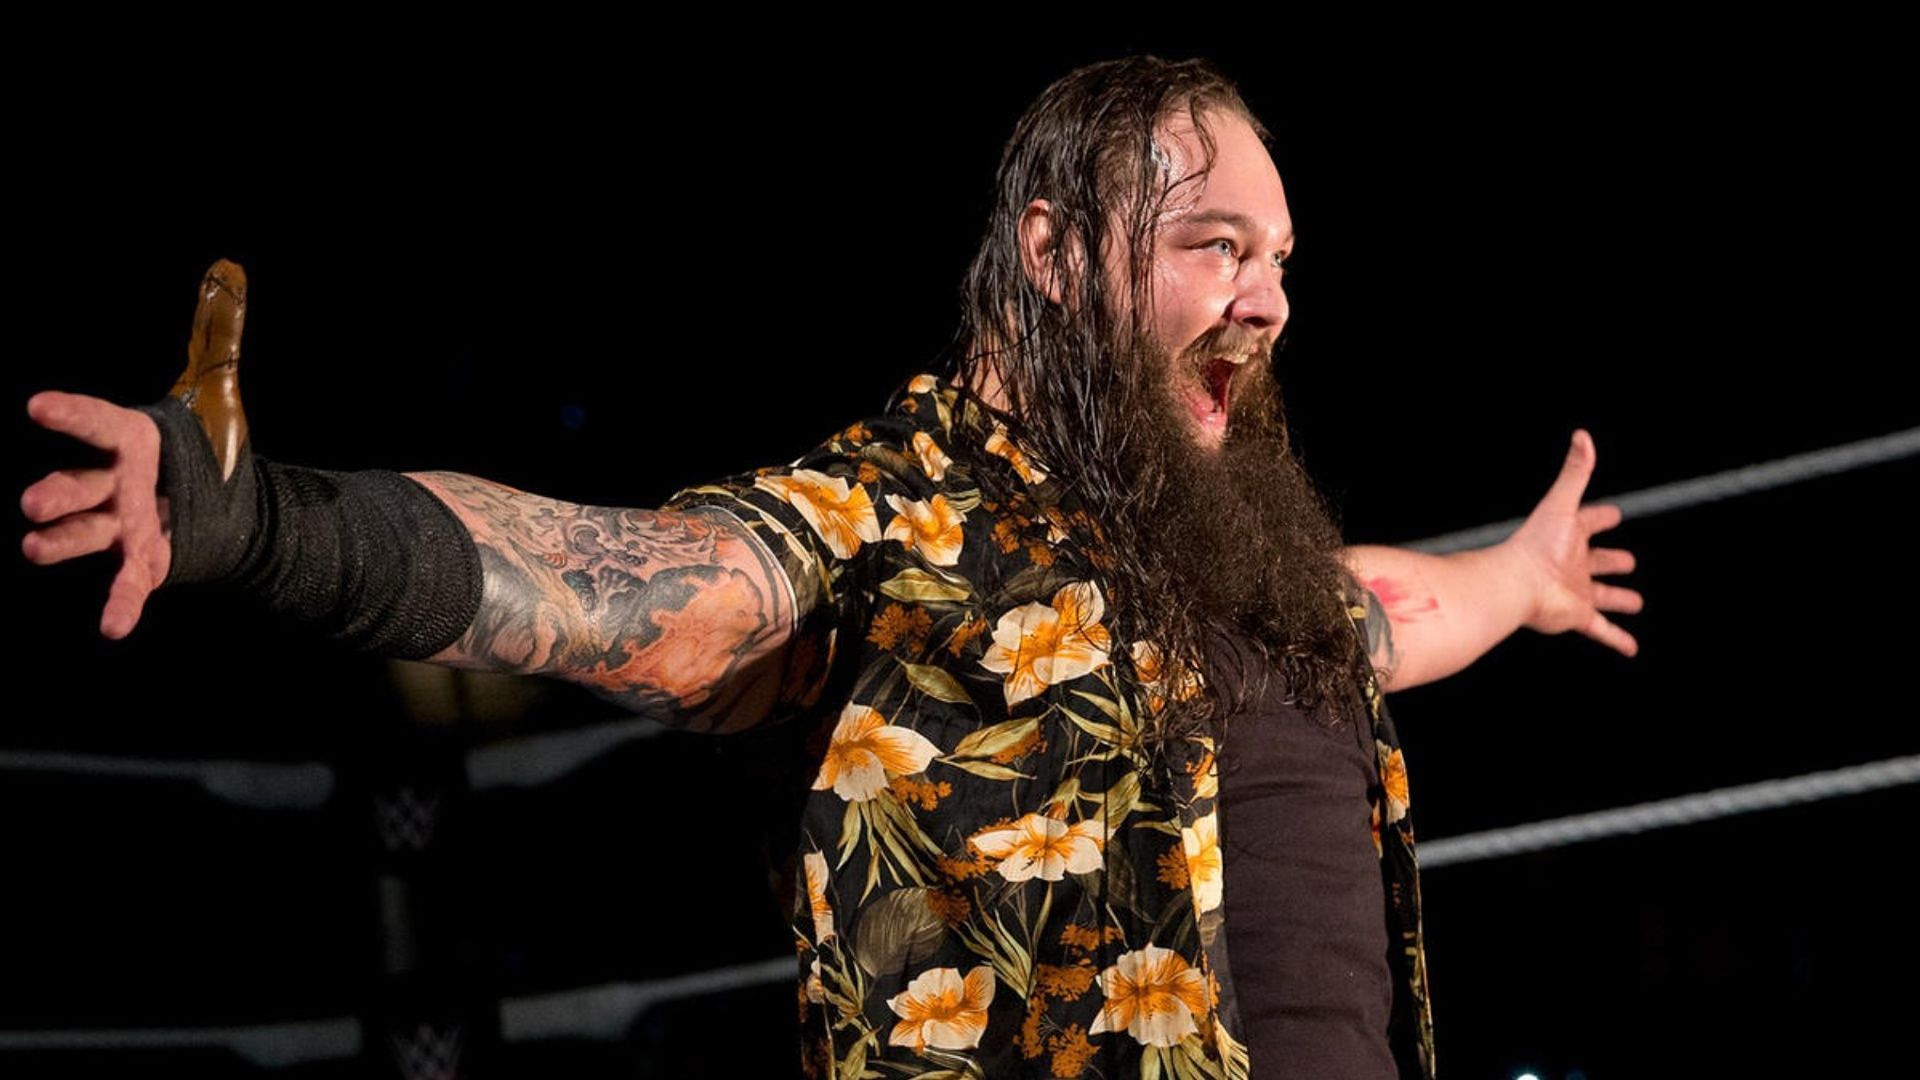 Bray Wyatt passed away on August 24 at the age of 36.